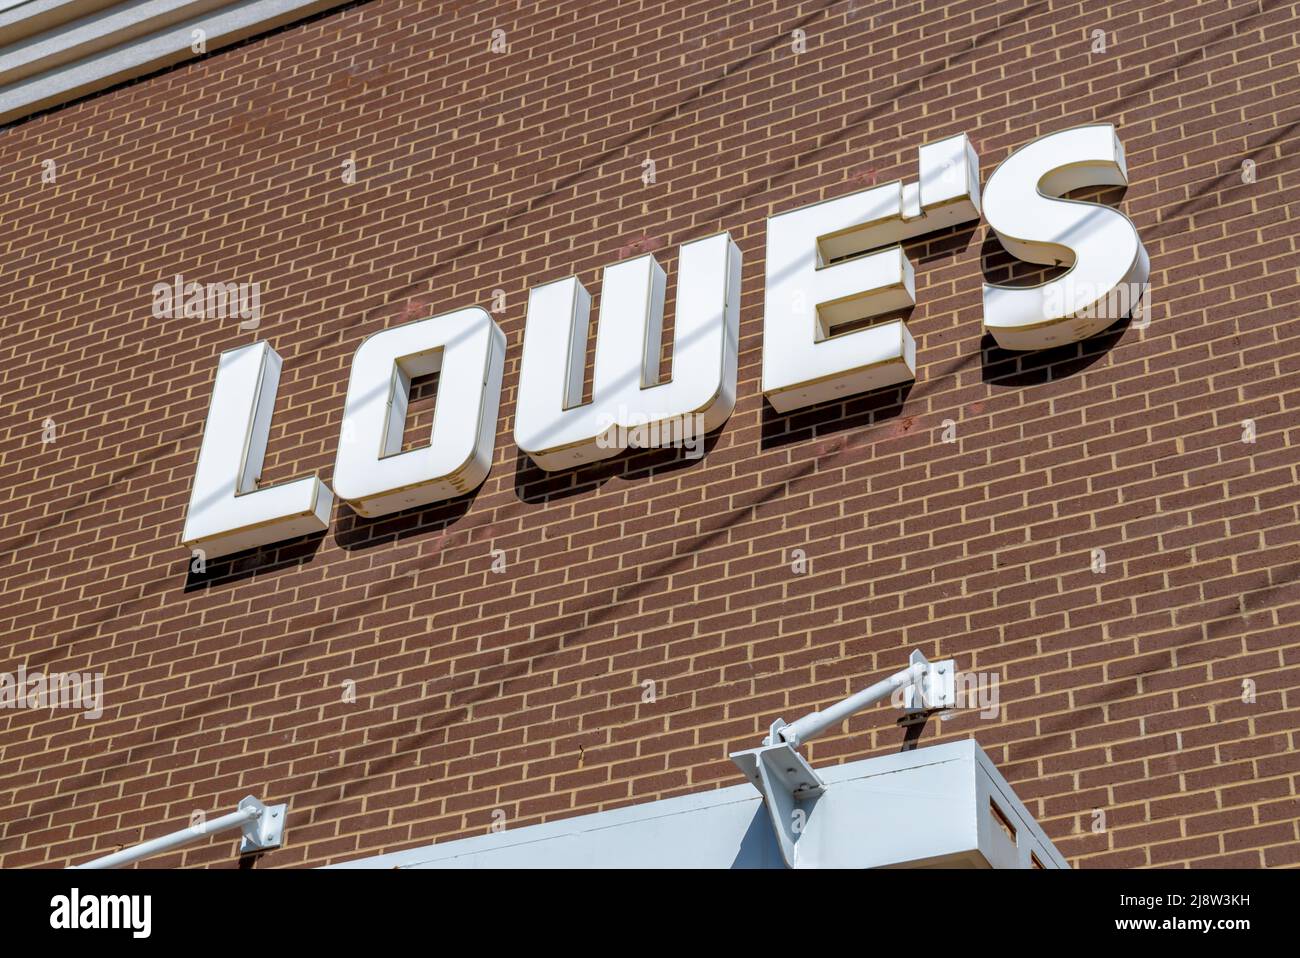 Outdoor, facade 'Lowes' brand and logo signage in three dimensional, white letters against brown brick building in bright sunlight. Stock Photo